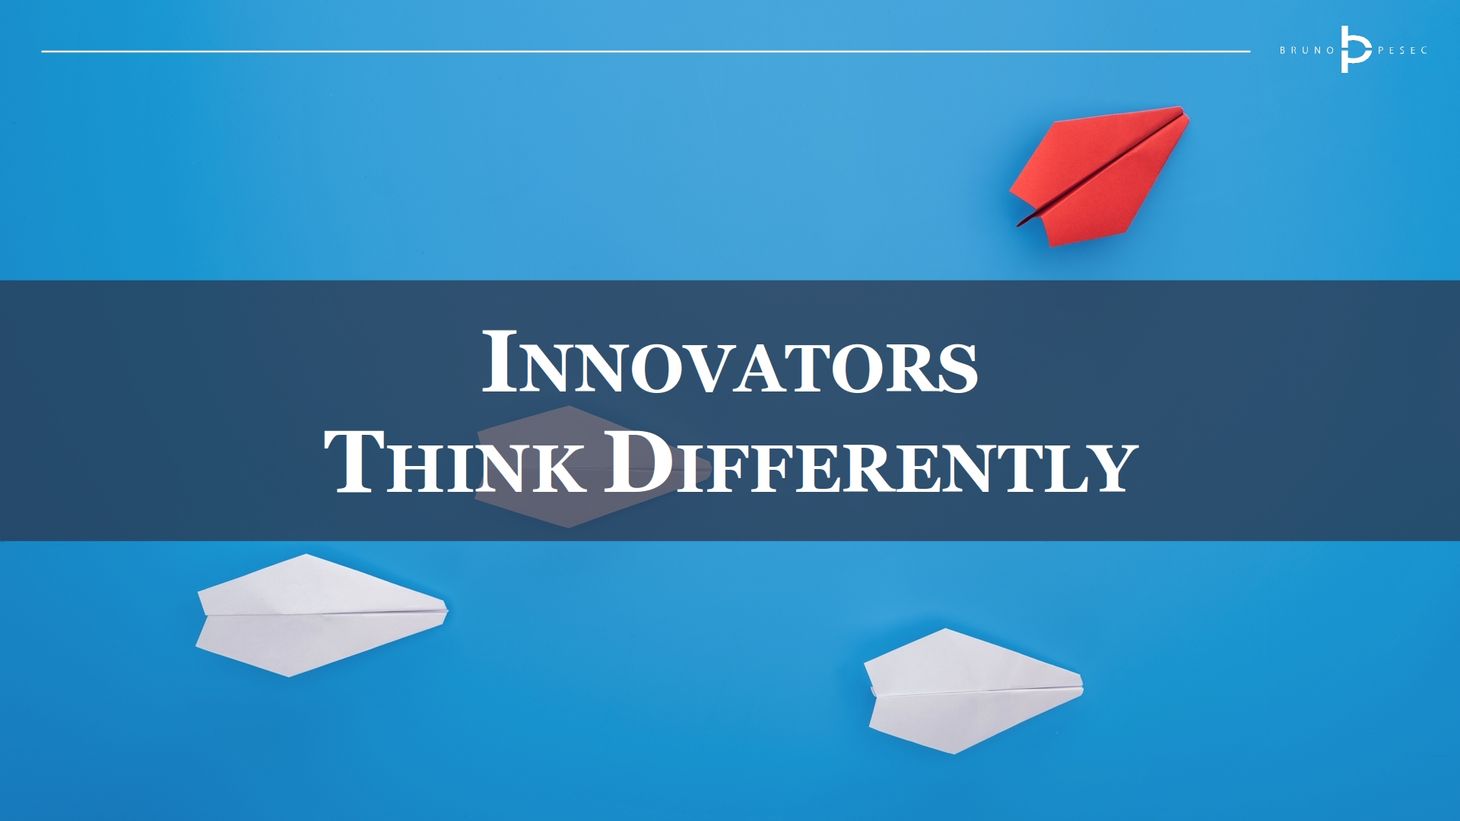 Innovators think differently